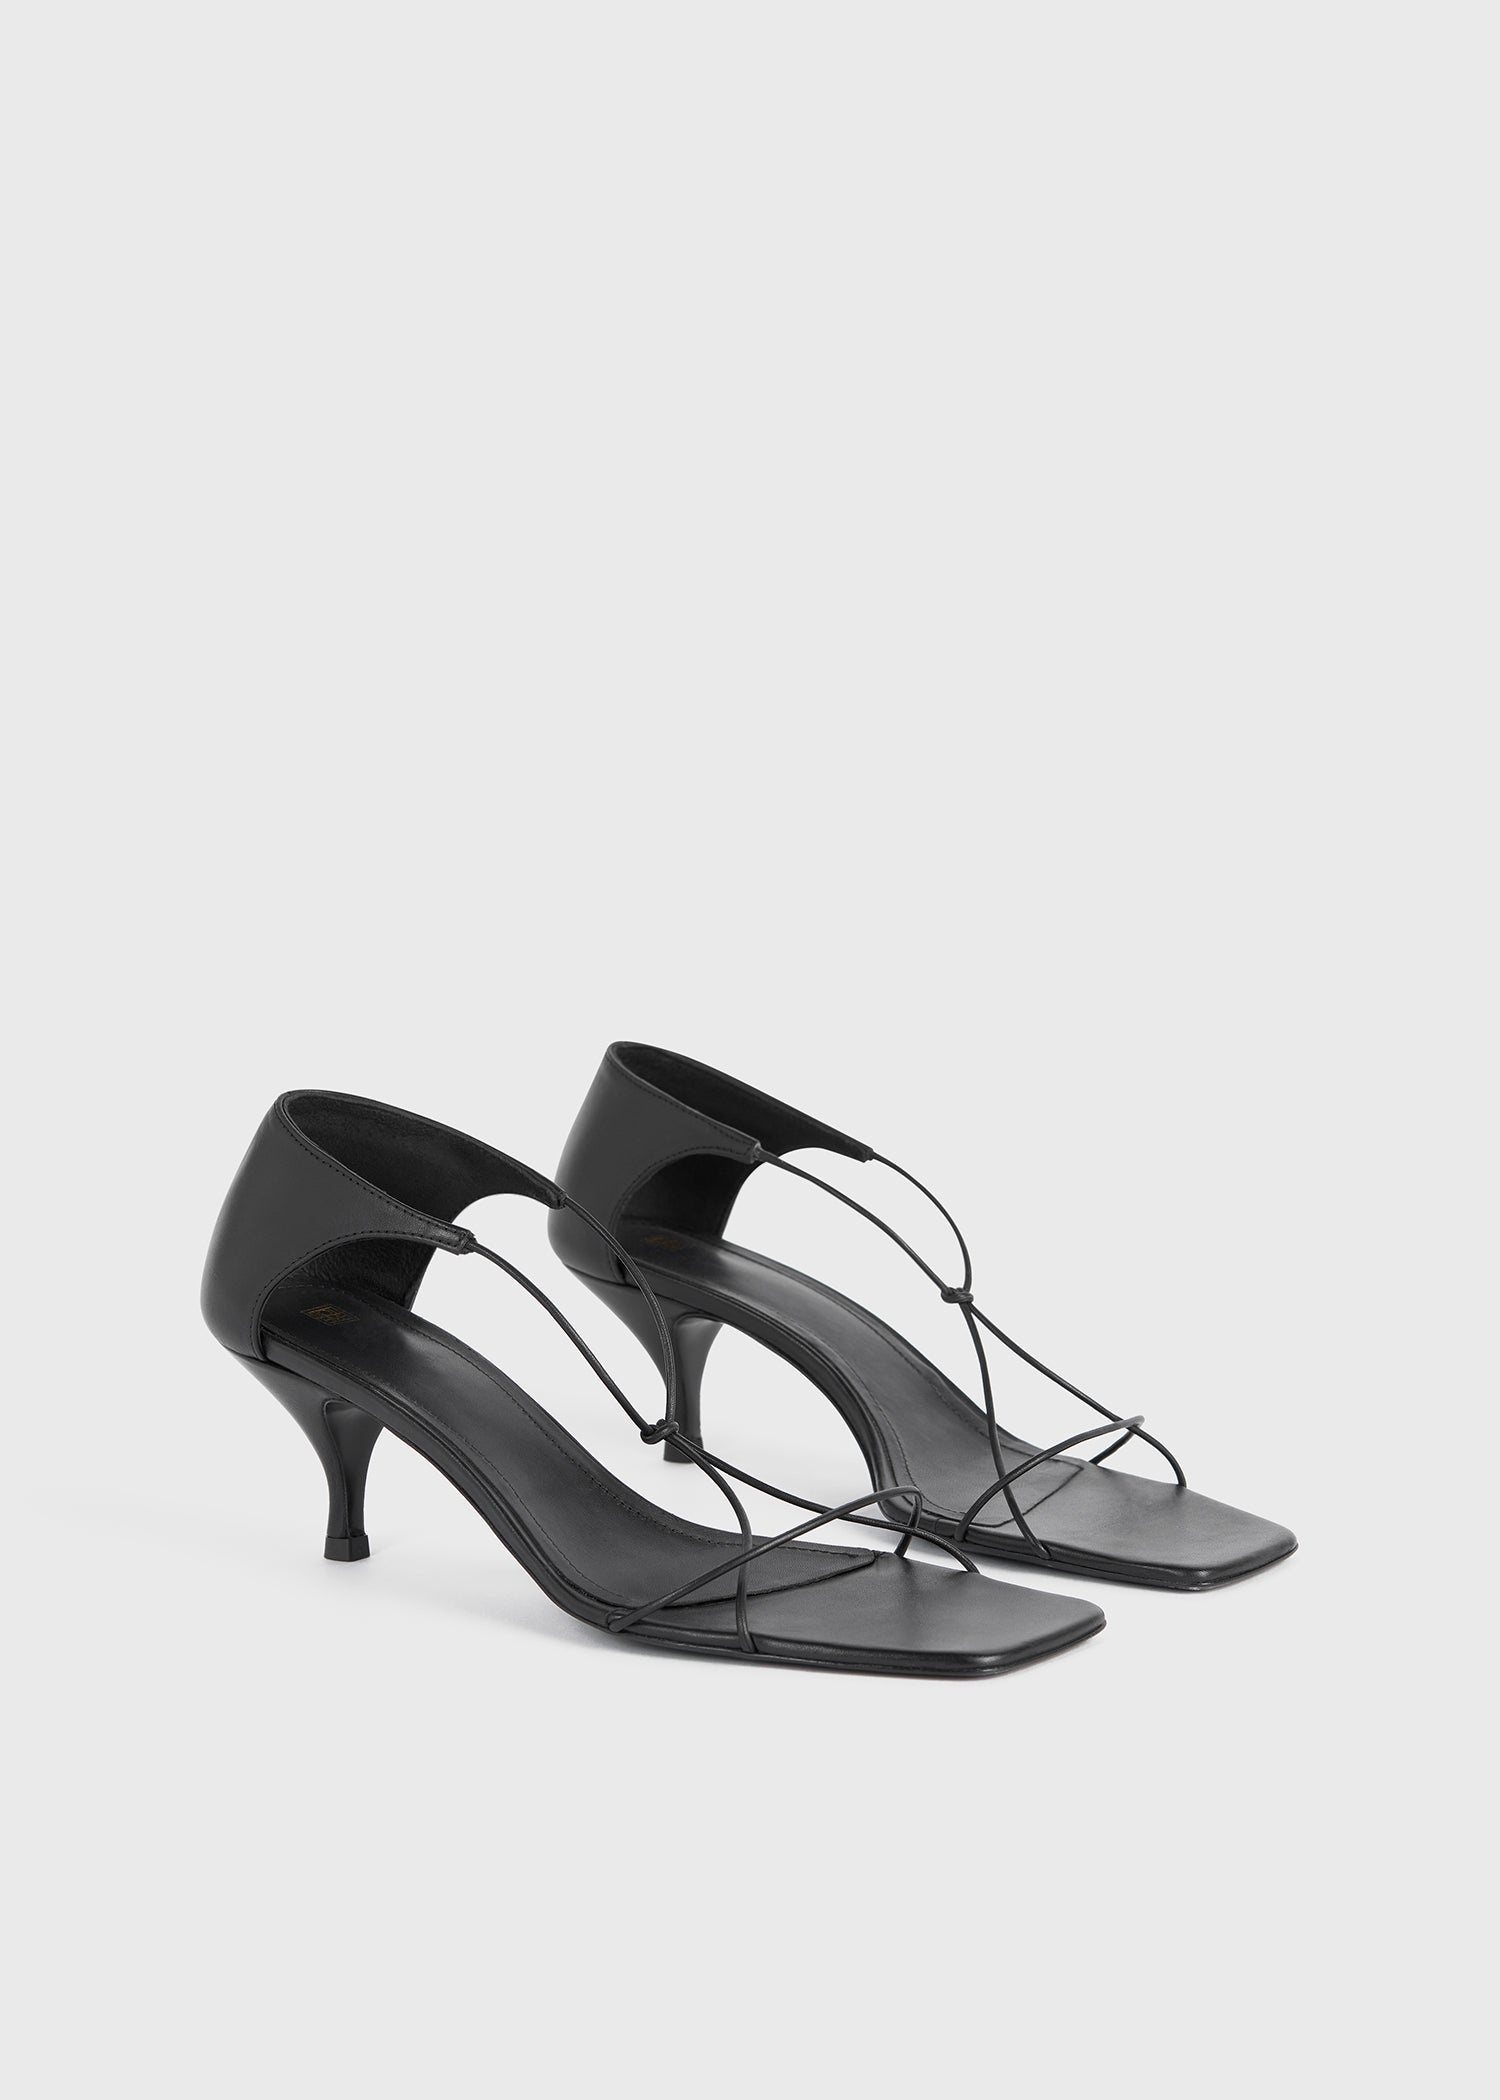 The Leather Knot Sandal black - 7